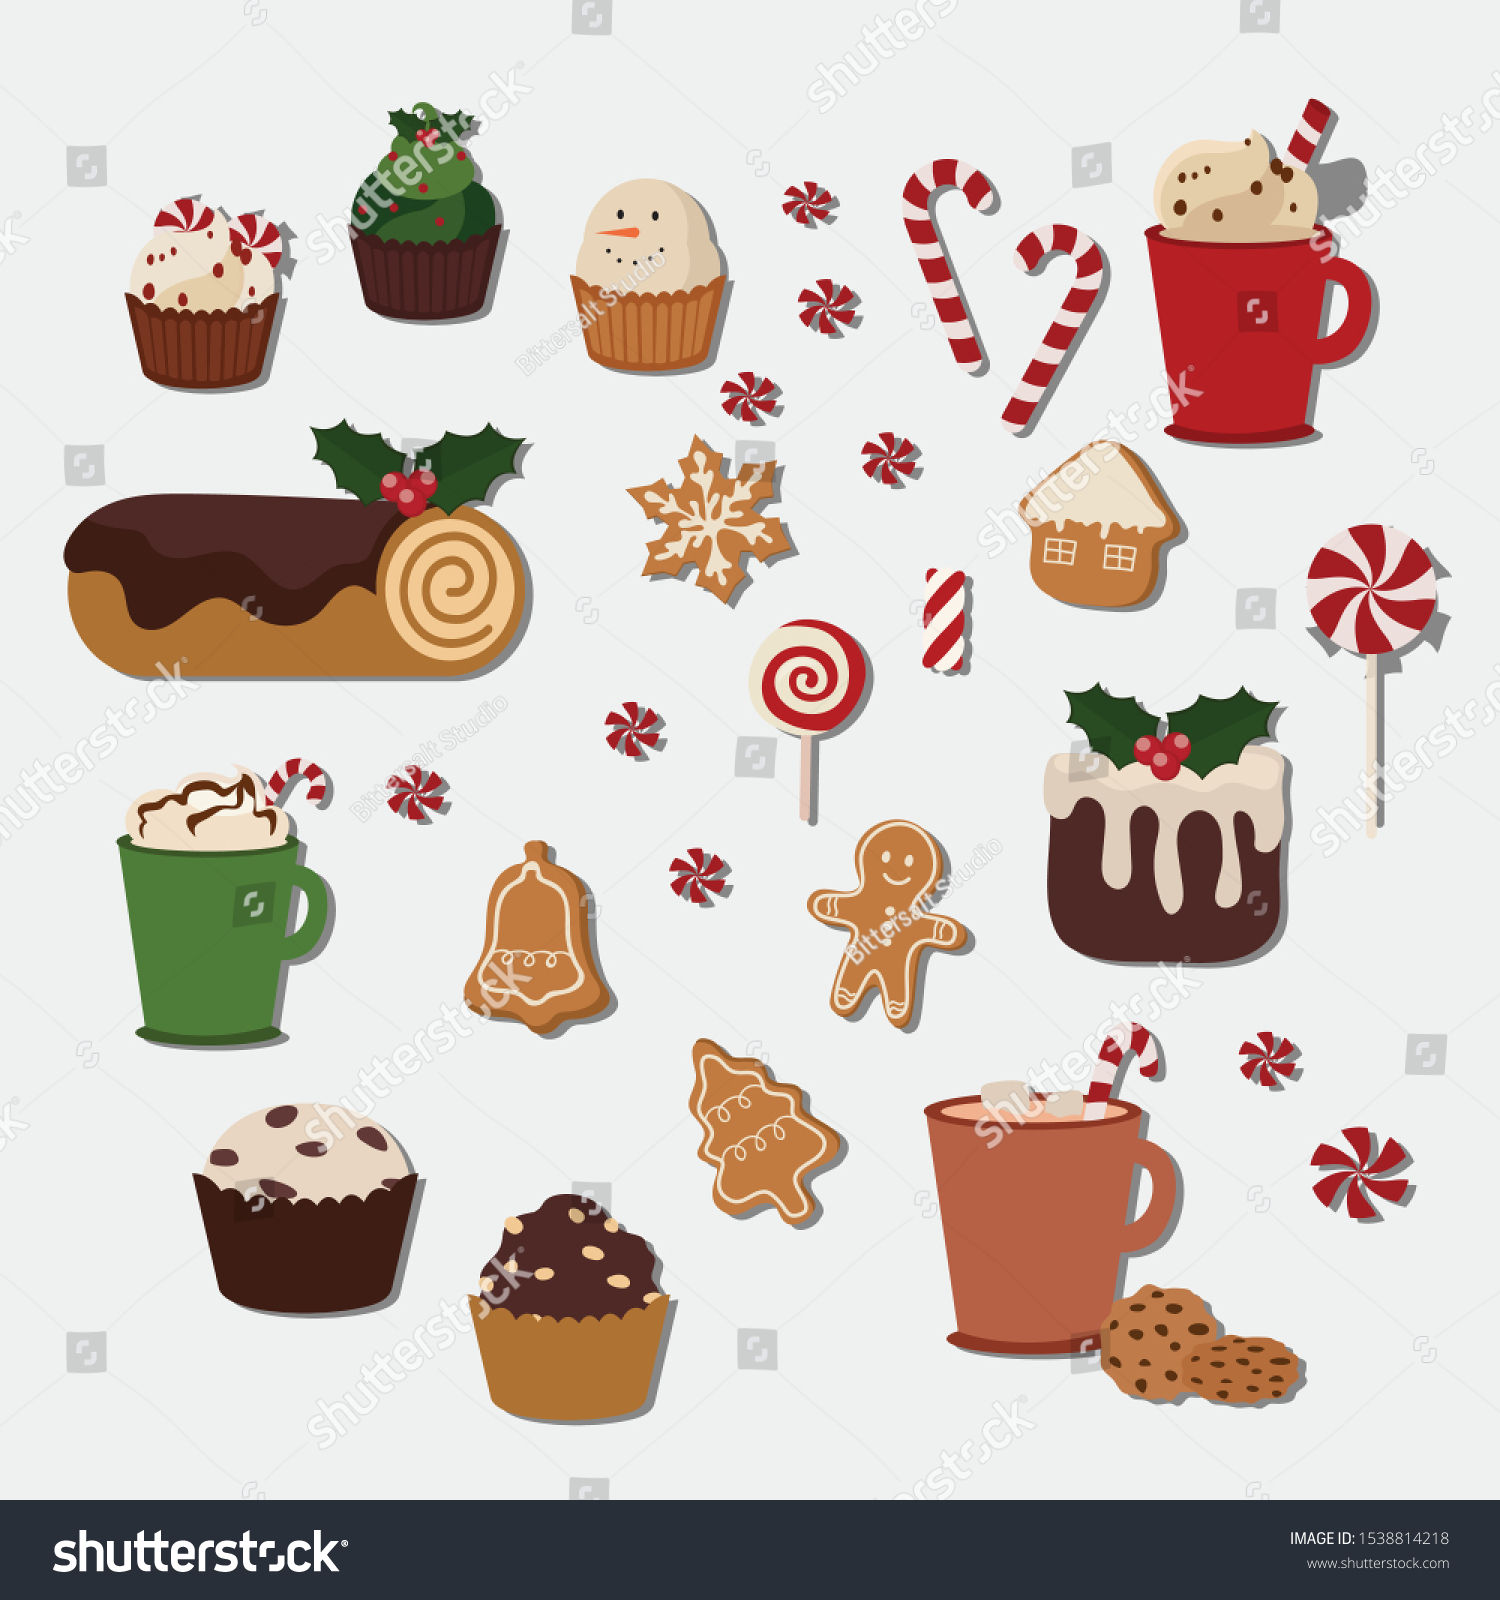 Merry Christmas Food Drink Collection Flat Stock Vector (Royalty Free ...